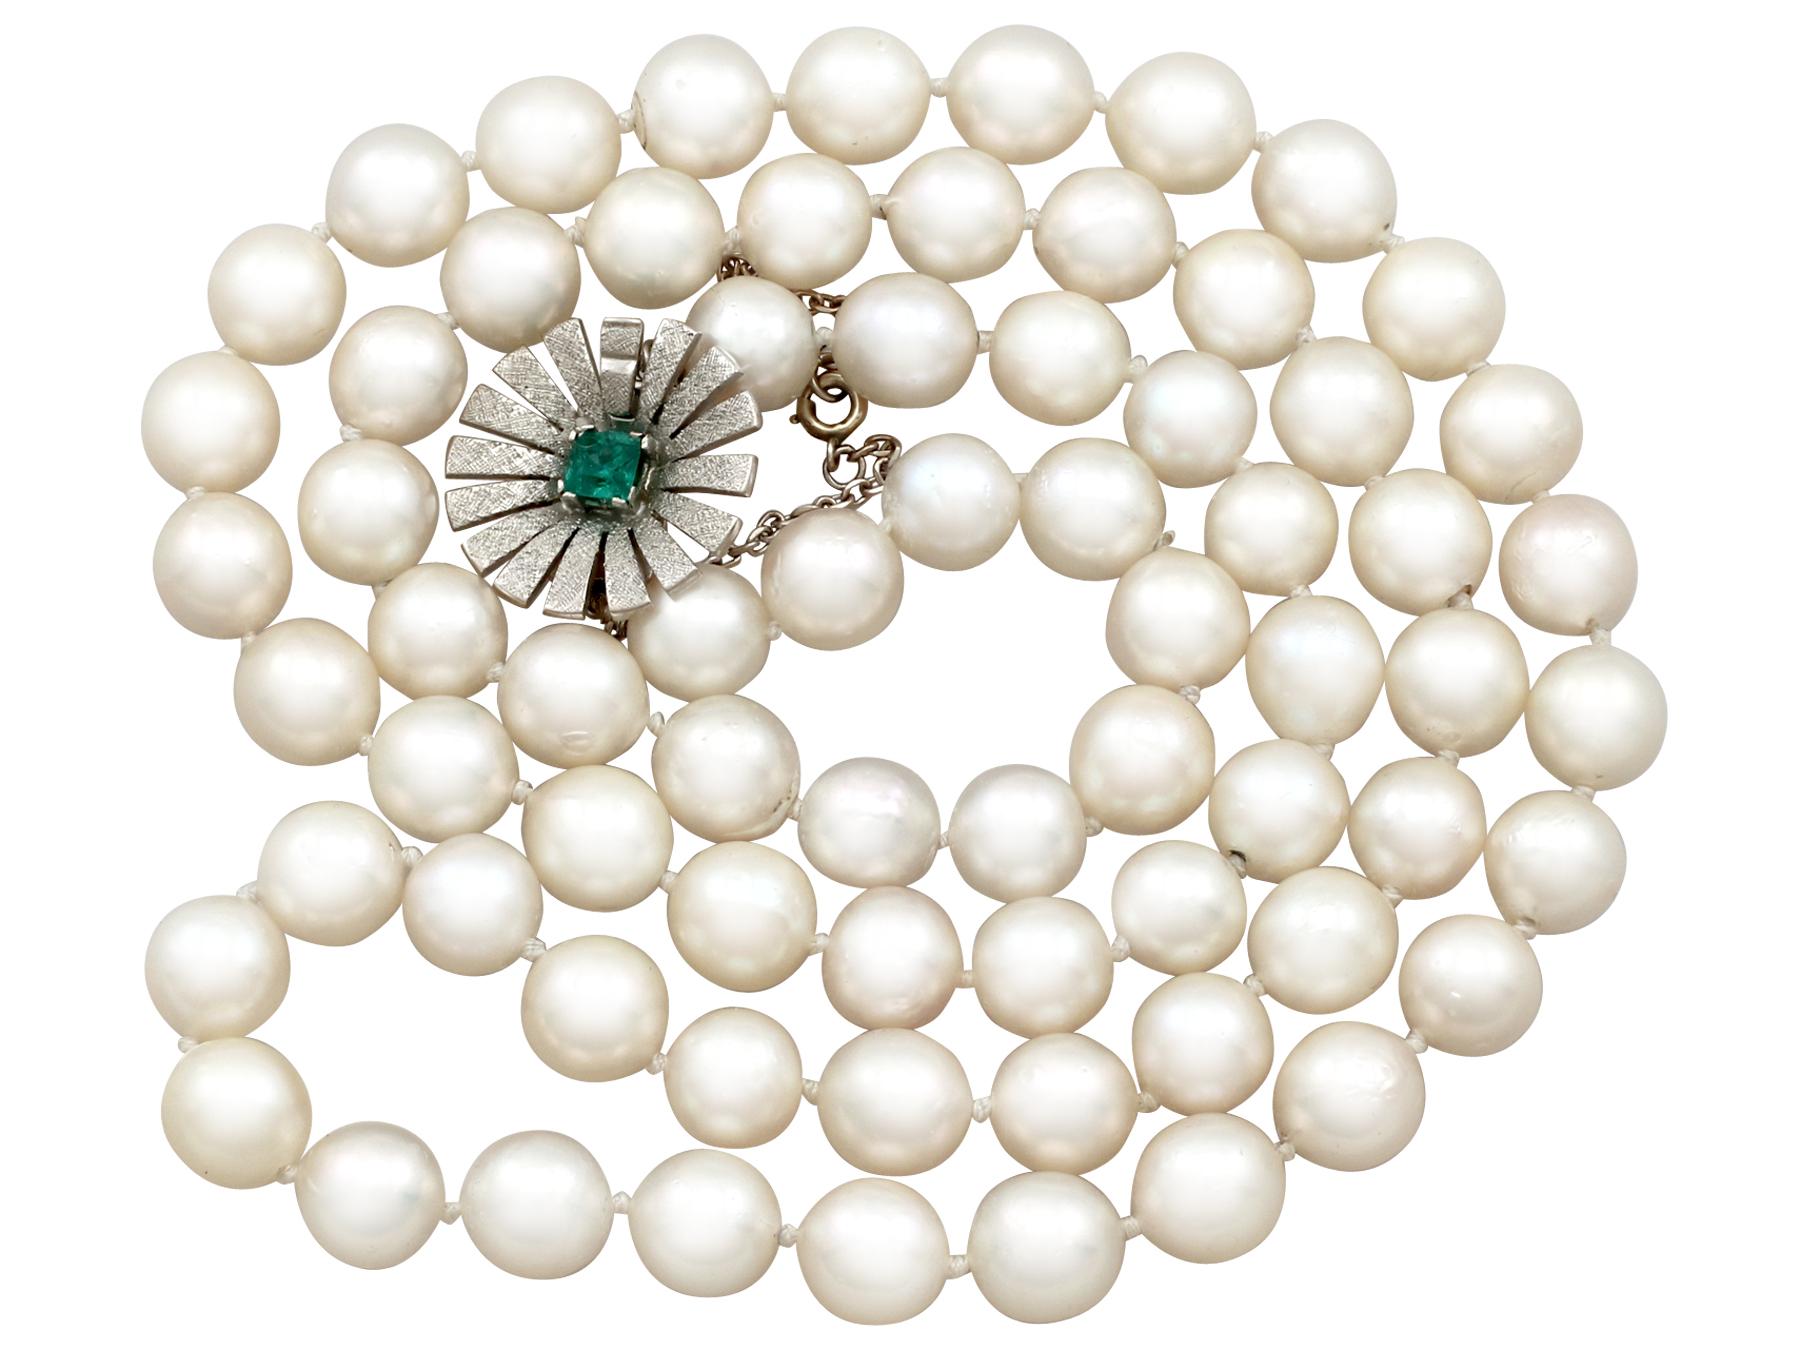 A fine and impressive vintage single strand cultured pearl necklace with a 0.48 carat emerald and 18 karat white gold clasp; part of our diverse jewelry collections.

A video of this fine pearl necklace is available upon request.

This impressive